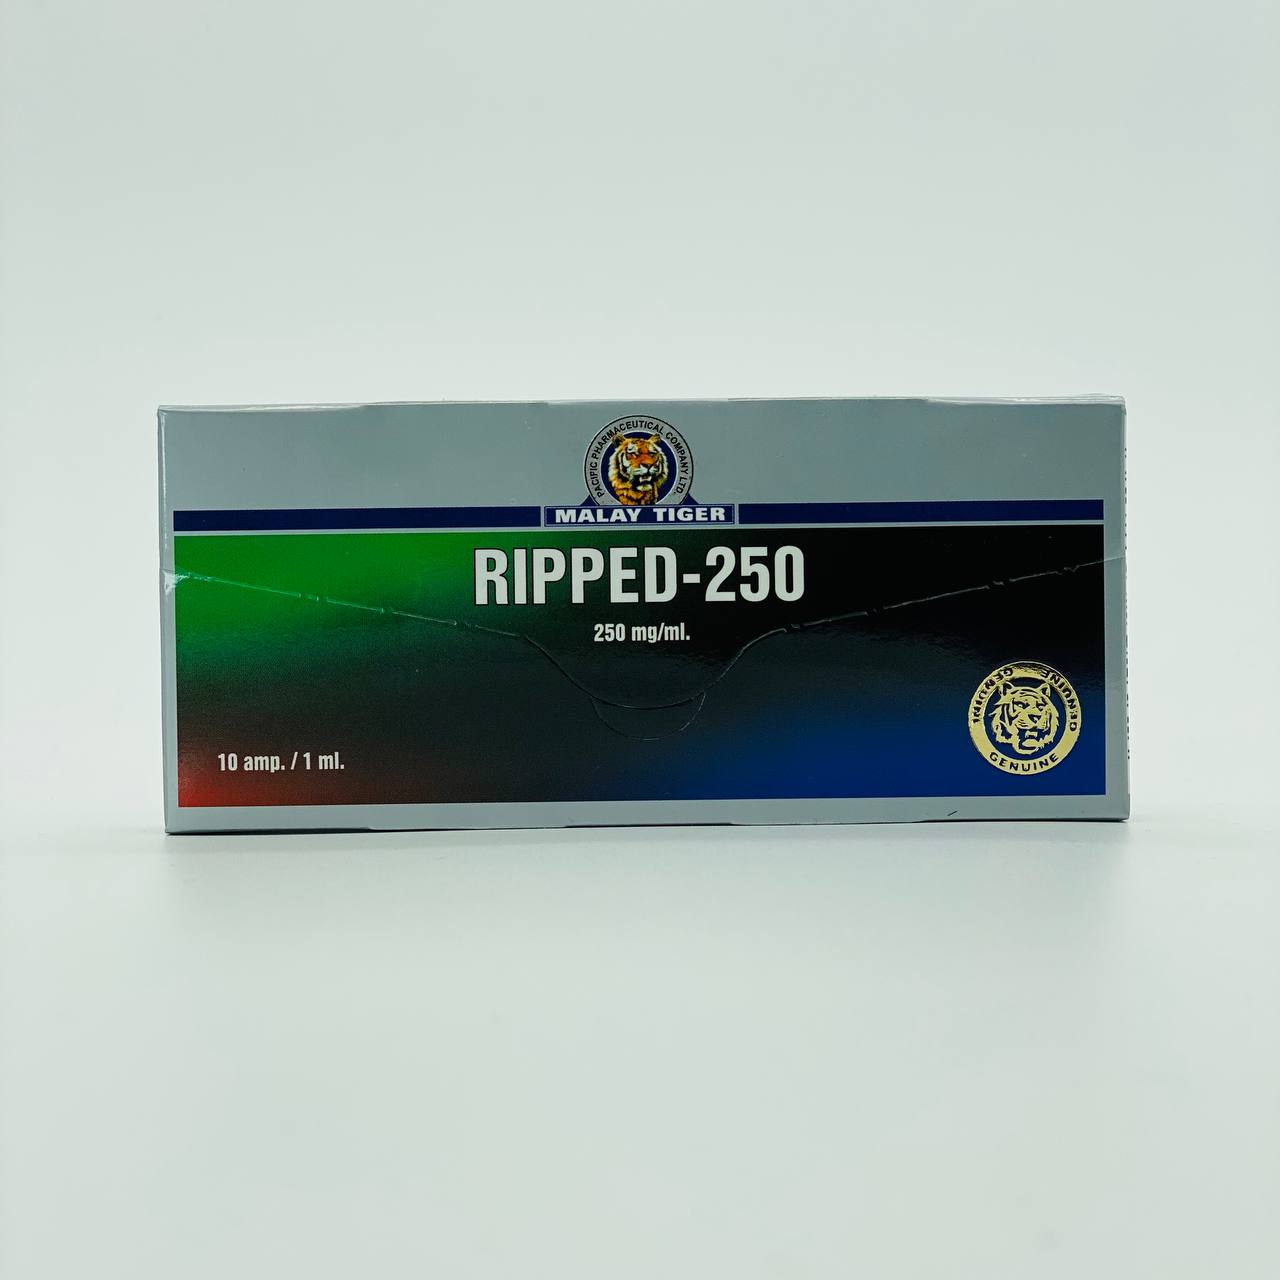 Ripped – 250 250 mg Malay Tiger Drostanolone